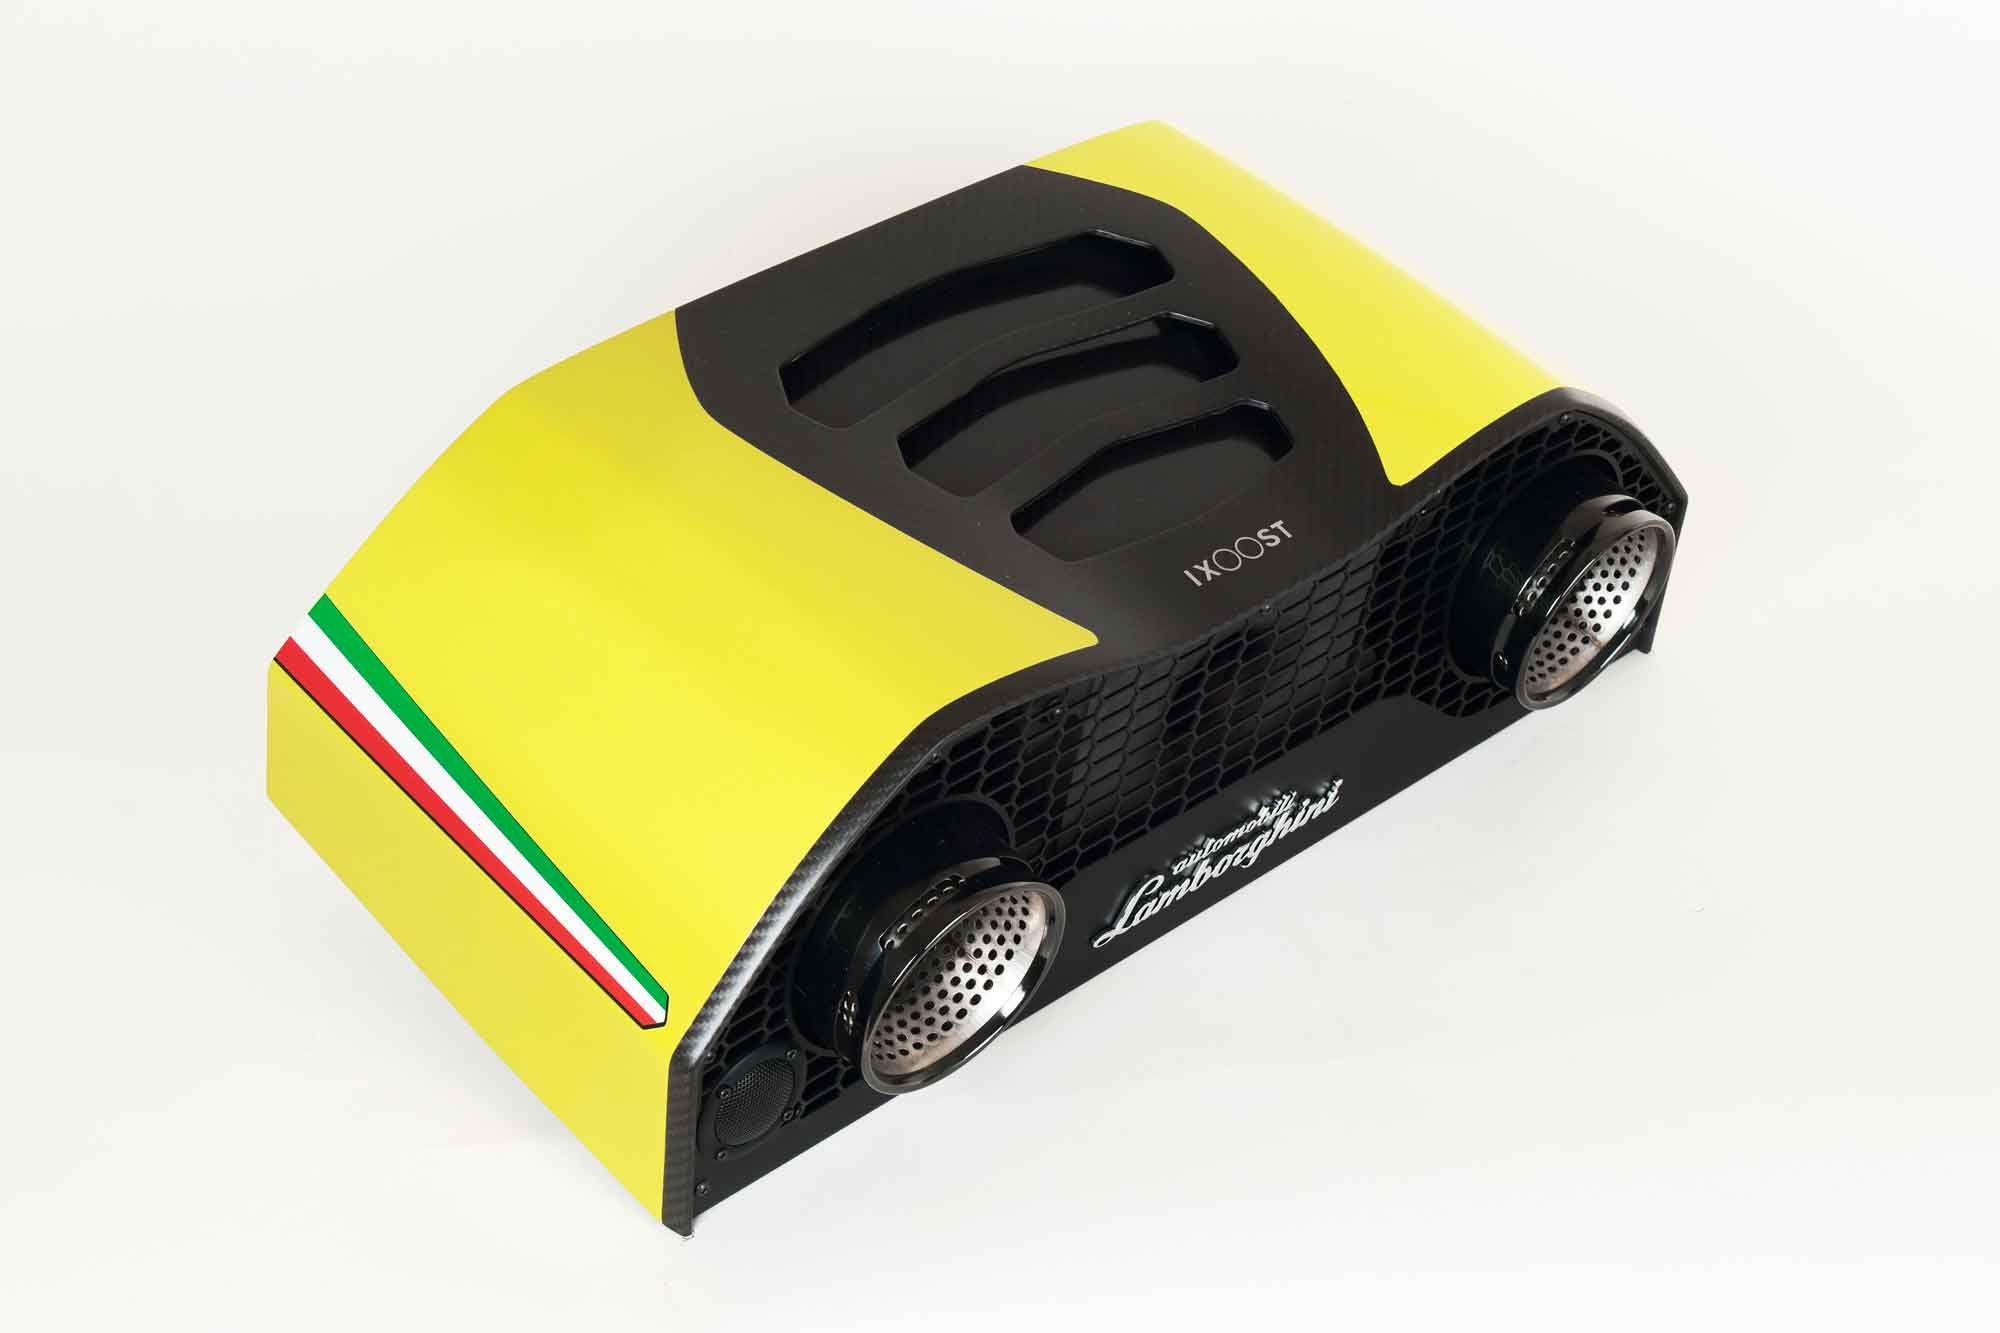 iXOOST AVALÁN Evros Yellow - cool speakers hand-crafted in italy